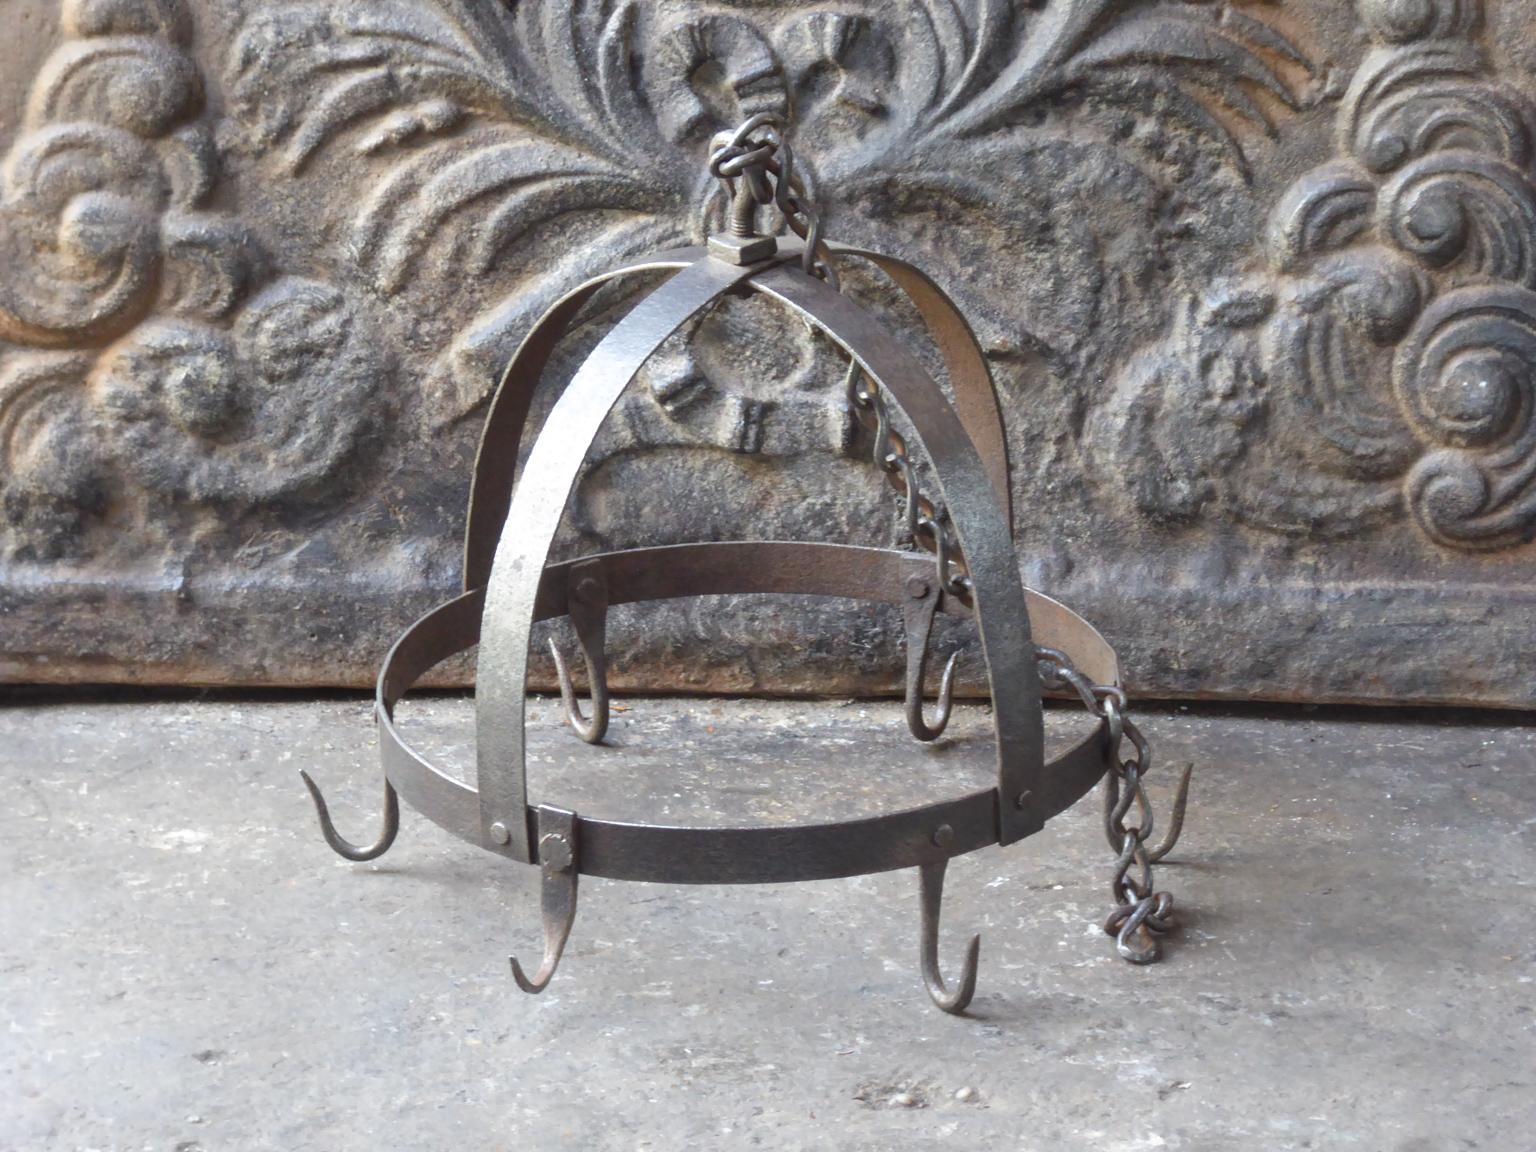 19th century Dutch crown used for hanging game and birds. The crown is made of wrought iron and is in a good condition.